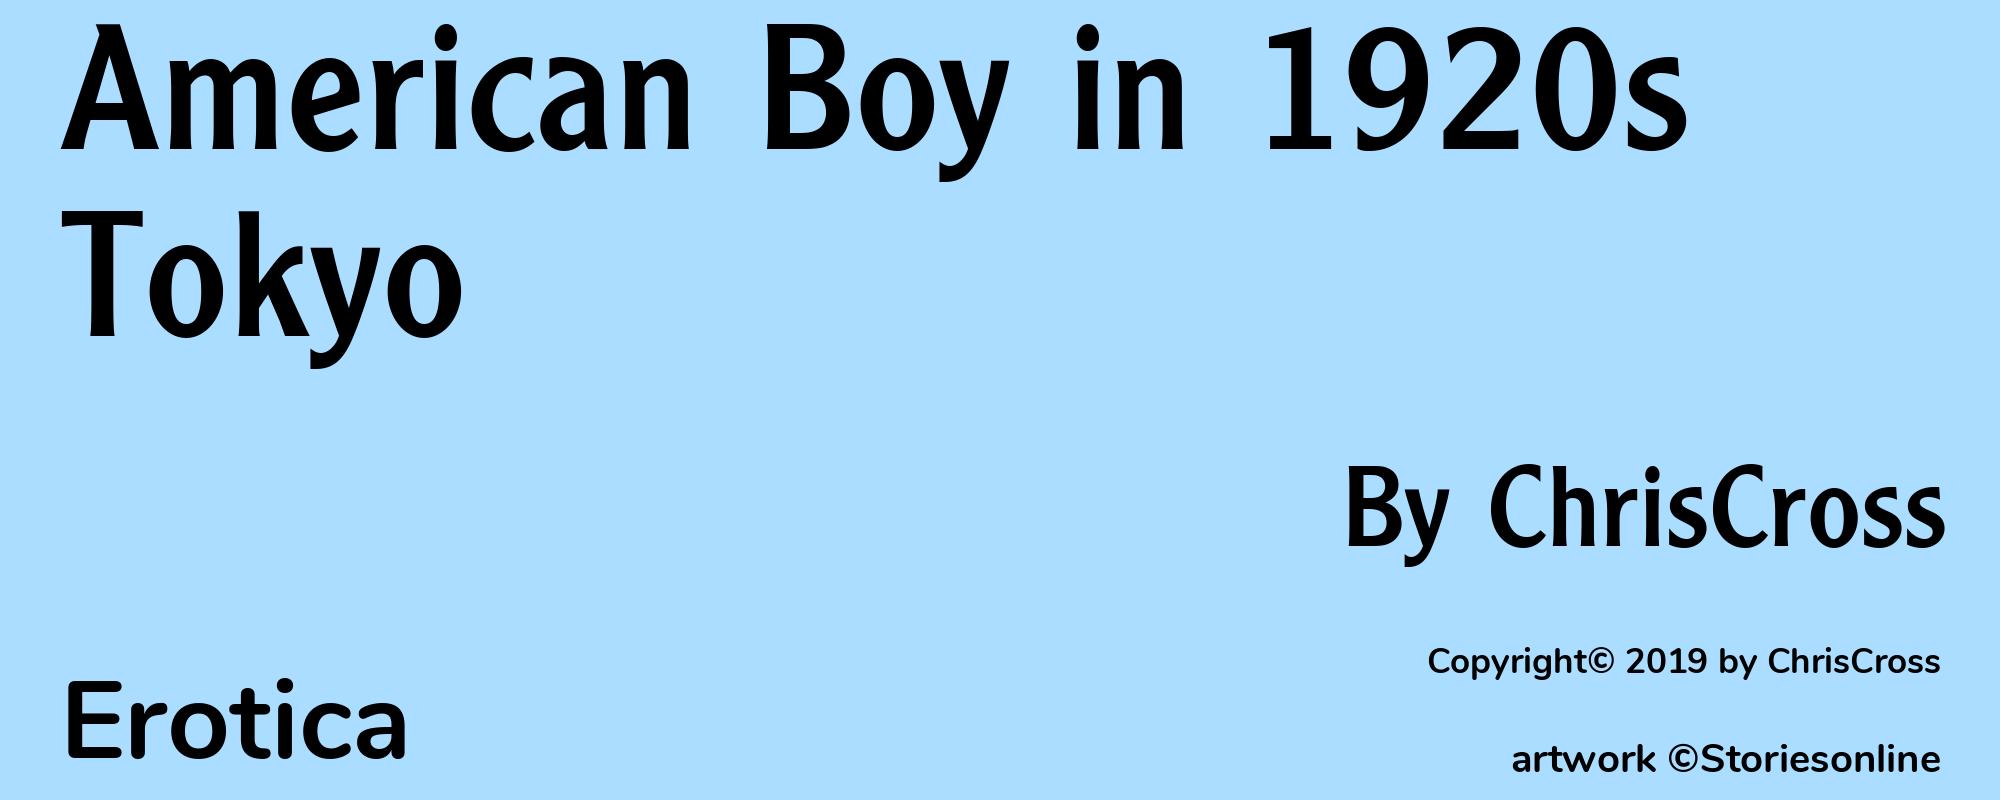 American Boy in 1920s Tokyo - Cover